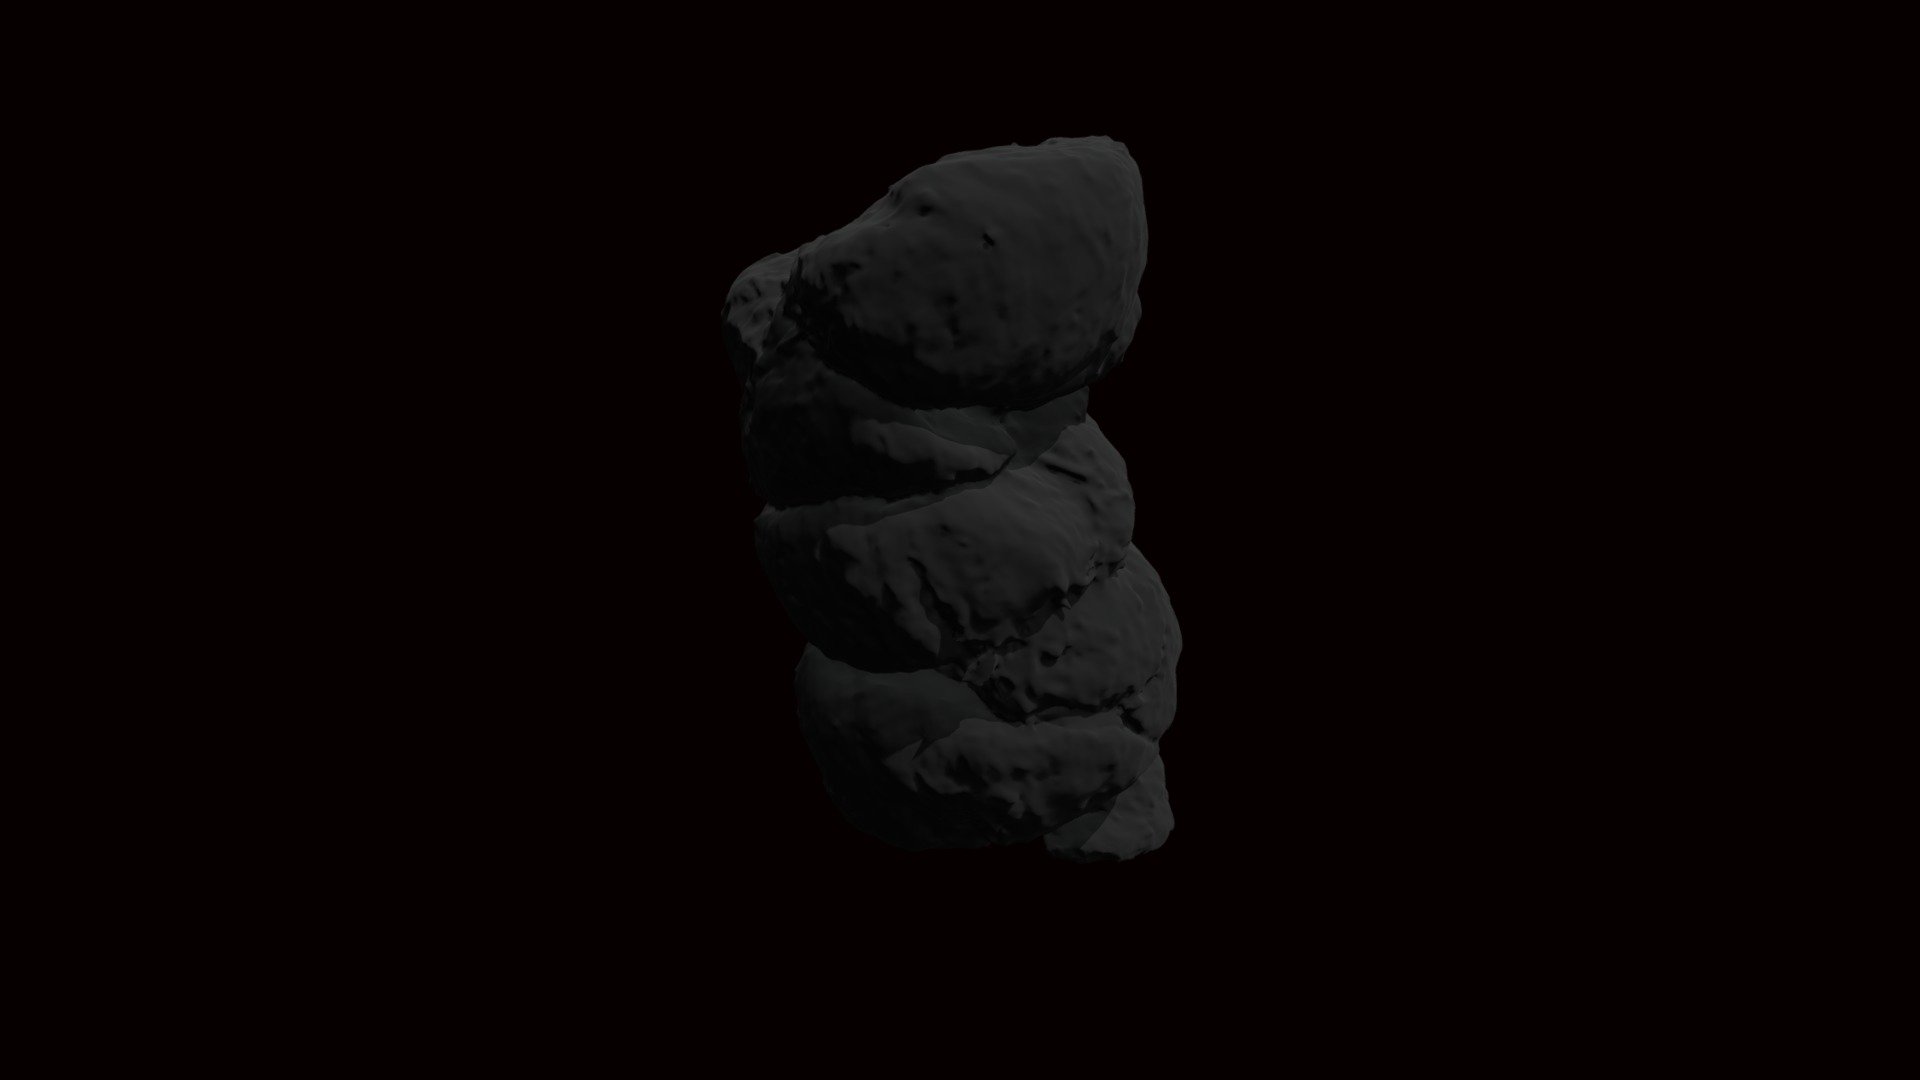 This coprolite from Nothrotheriops shastensi from Rampart Cave, Arizona was 3D scanned on November 28, 2018 in the Smithsonian Institution National Museum of Natural History Department of Paleobiology with a NextEngine Desktop 3D scanner. More information on this speciment can be found here: http://n2t.net/ark:/65665/302054c44-8194-4149-ae96-2311de598226. Courtesy of the Smithsonian Institution National Museum of Natural History 3d model